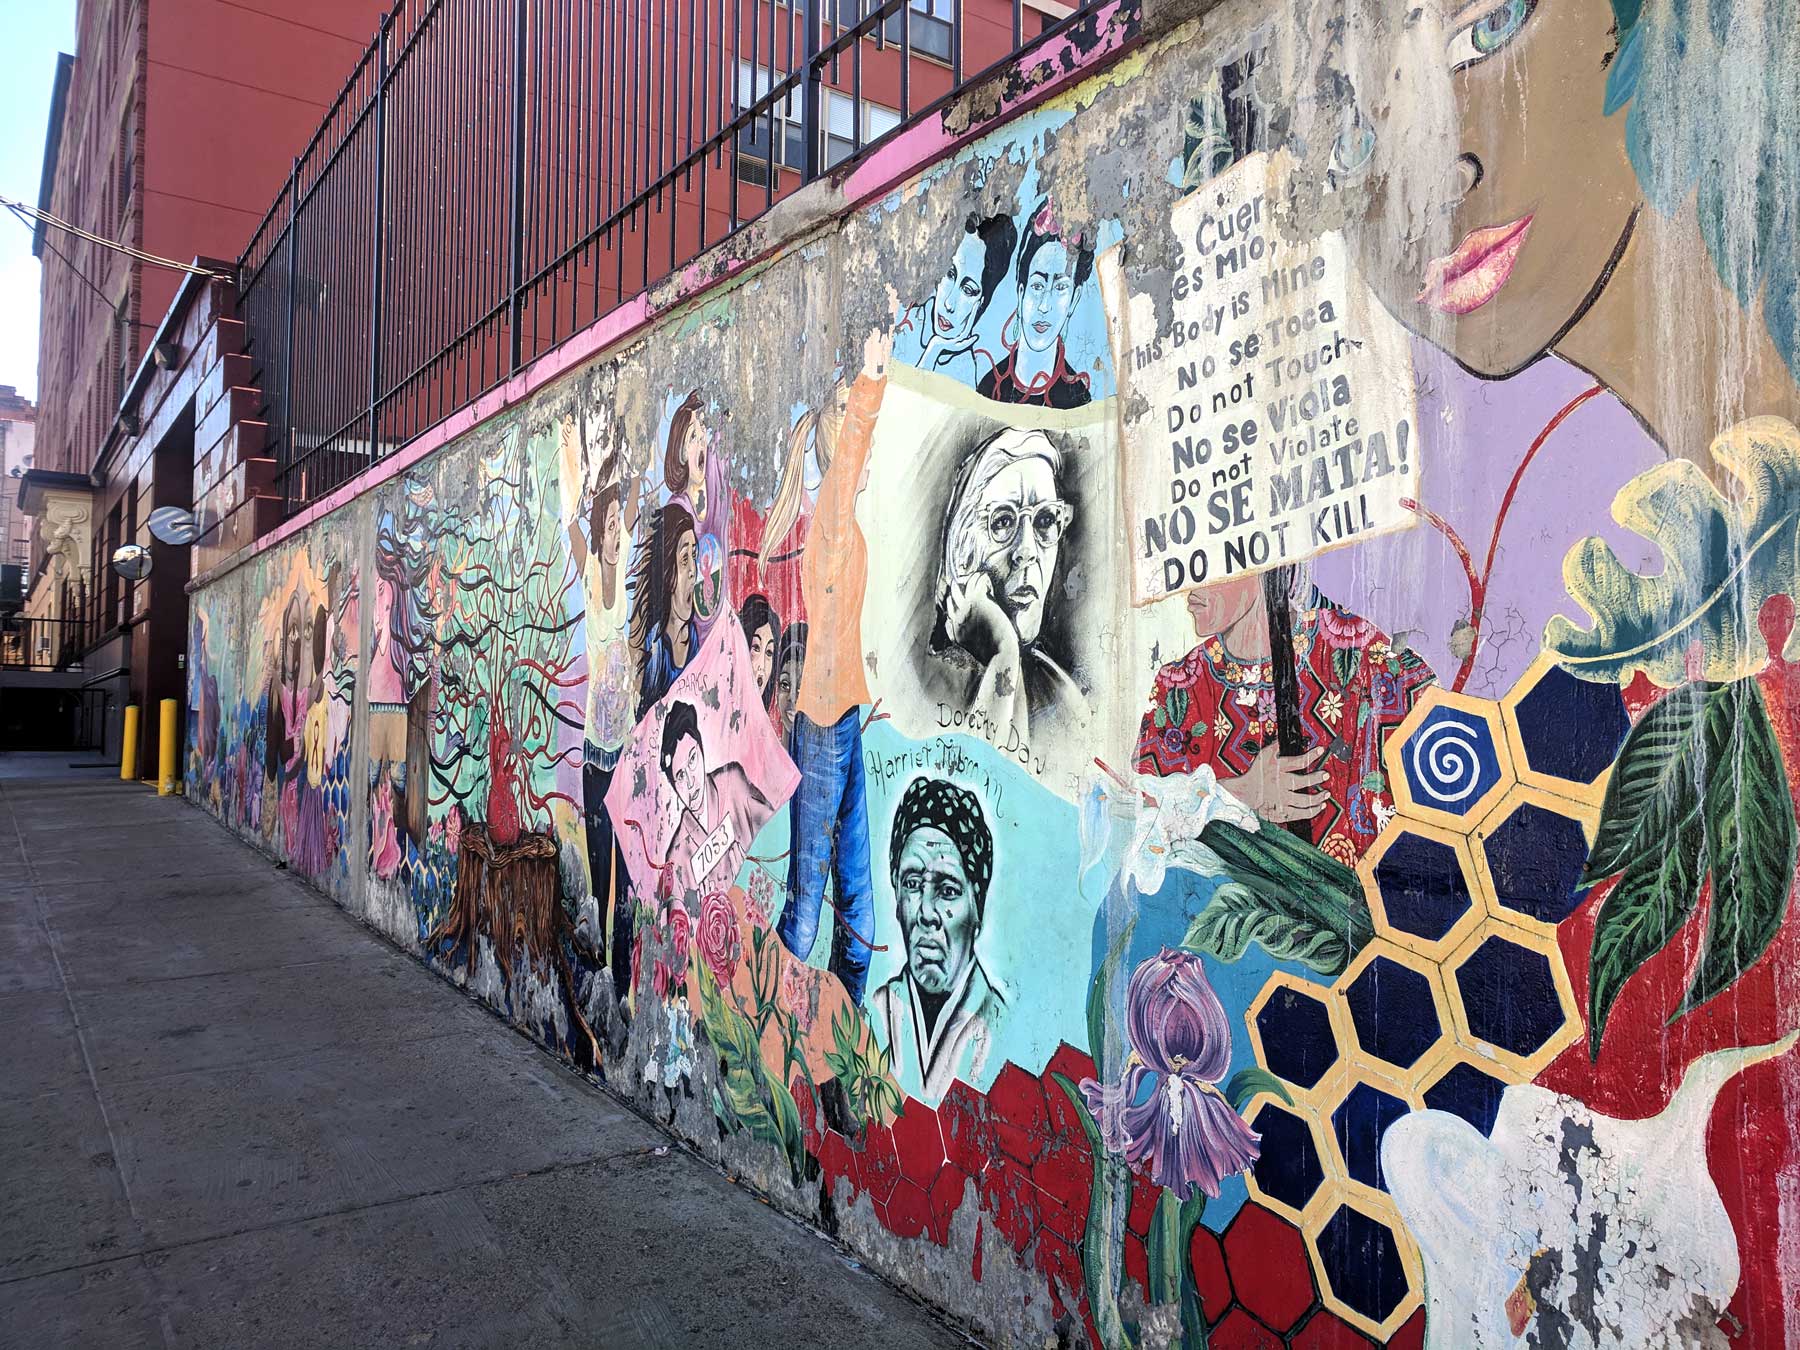 A mural of historical figures along a city street.